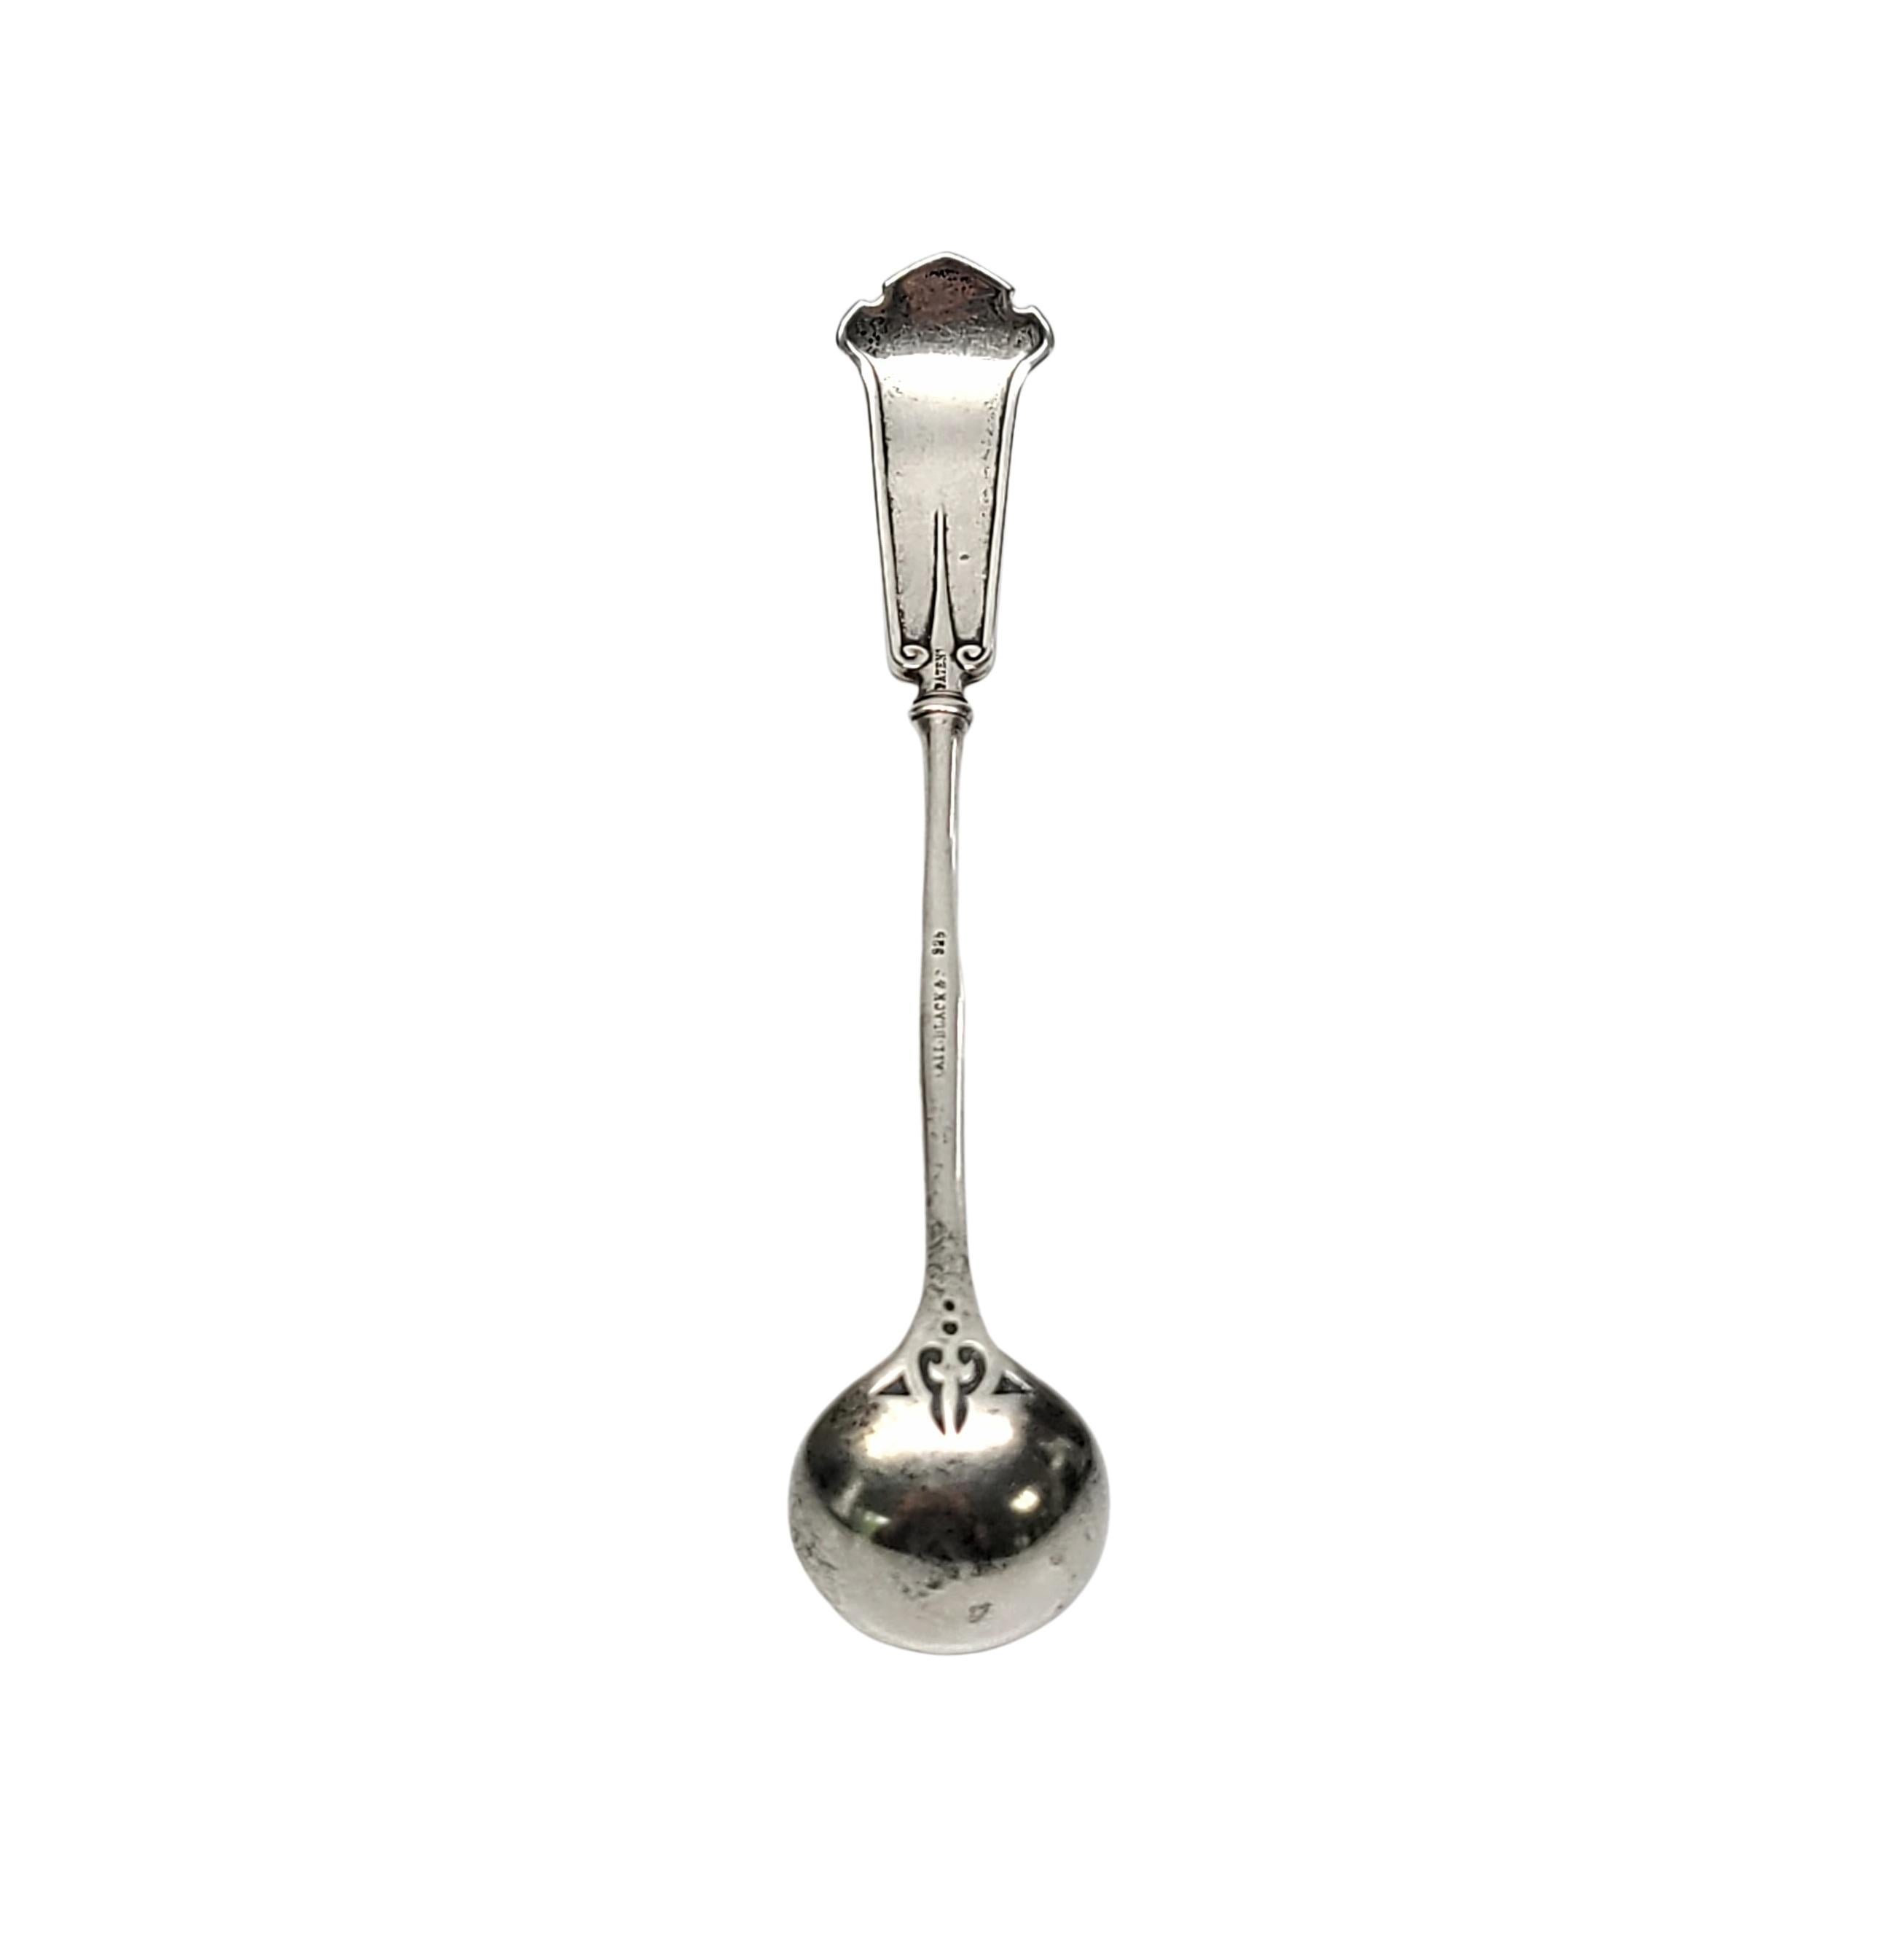 Sterling silver mustard or condiment ladle by John Wendt in the Arabesque pattern.

Monogram appears to be M

Designed in 1870 by Bernhard Beiderhase for the prominent NYC retailer Ball Black & Co, a leading jewelry house of the nation from